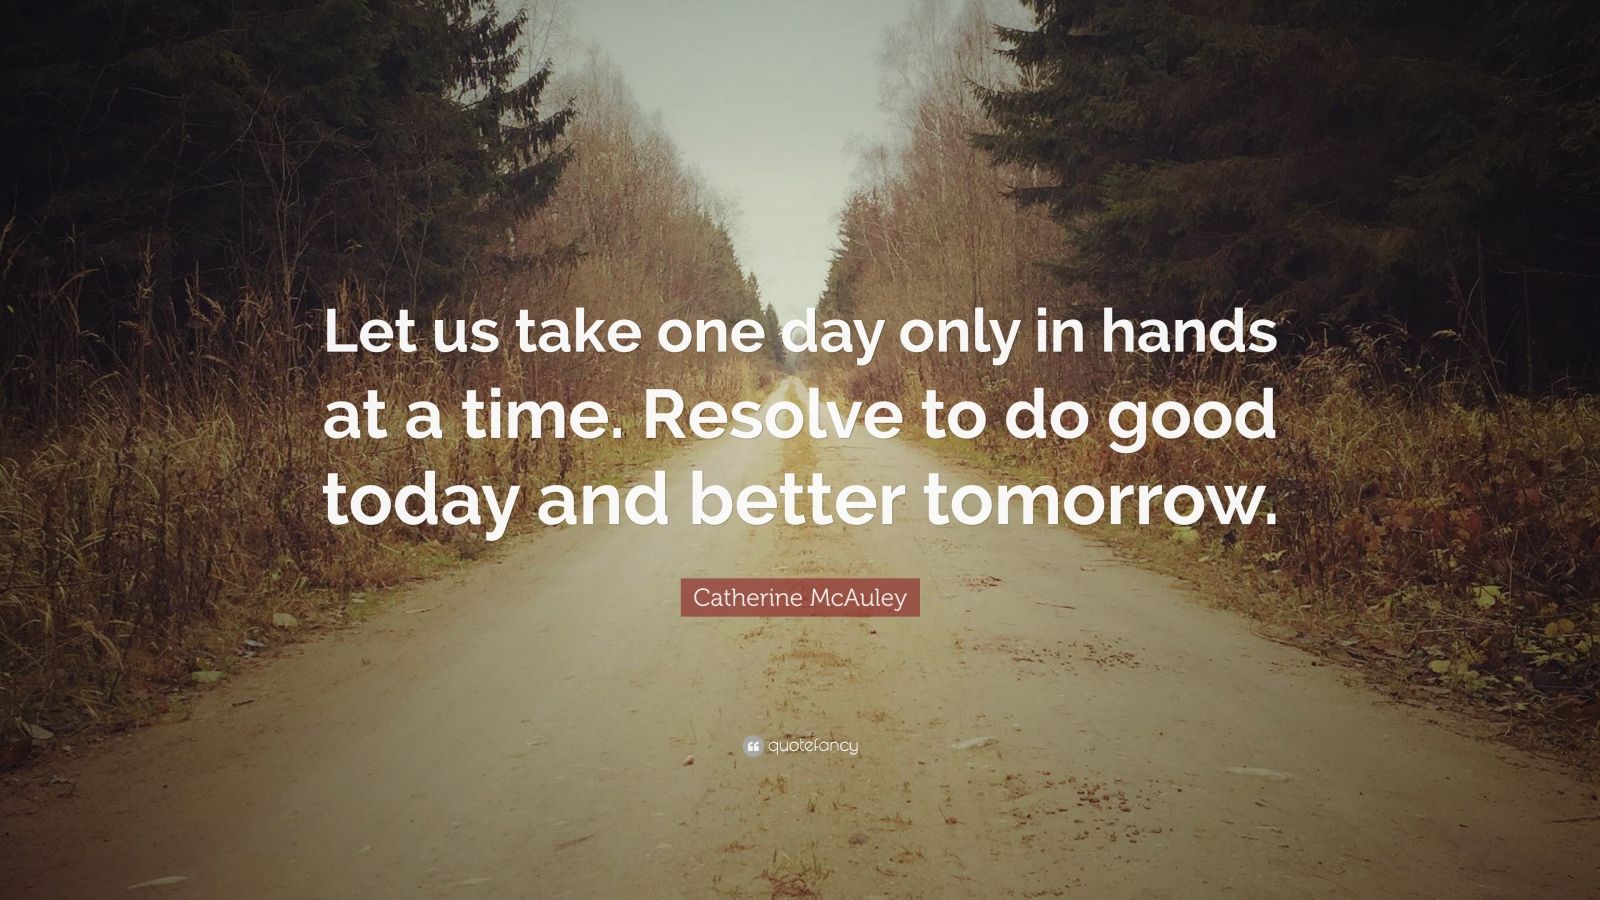 Catherine McAuley Quote: “Let us take one day only in hands at a time ...